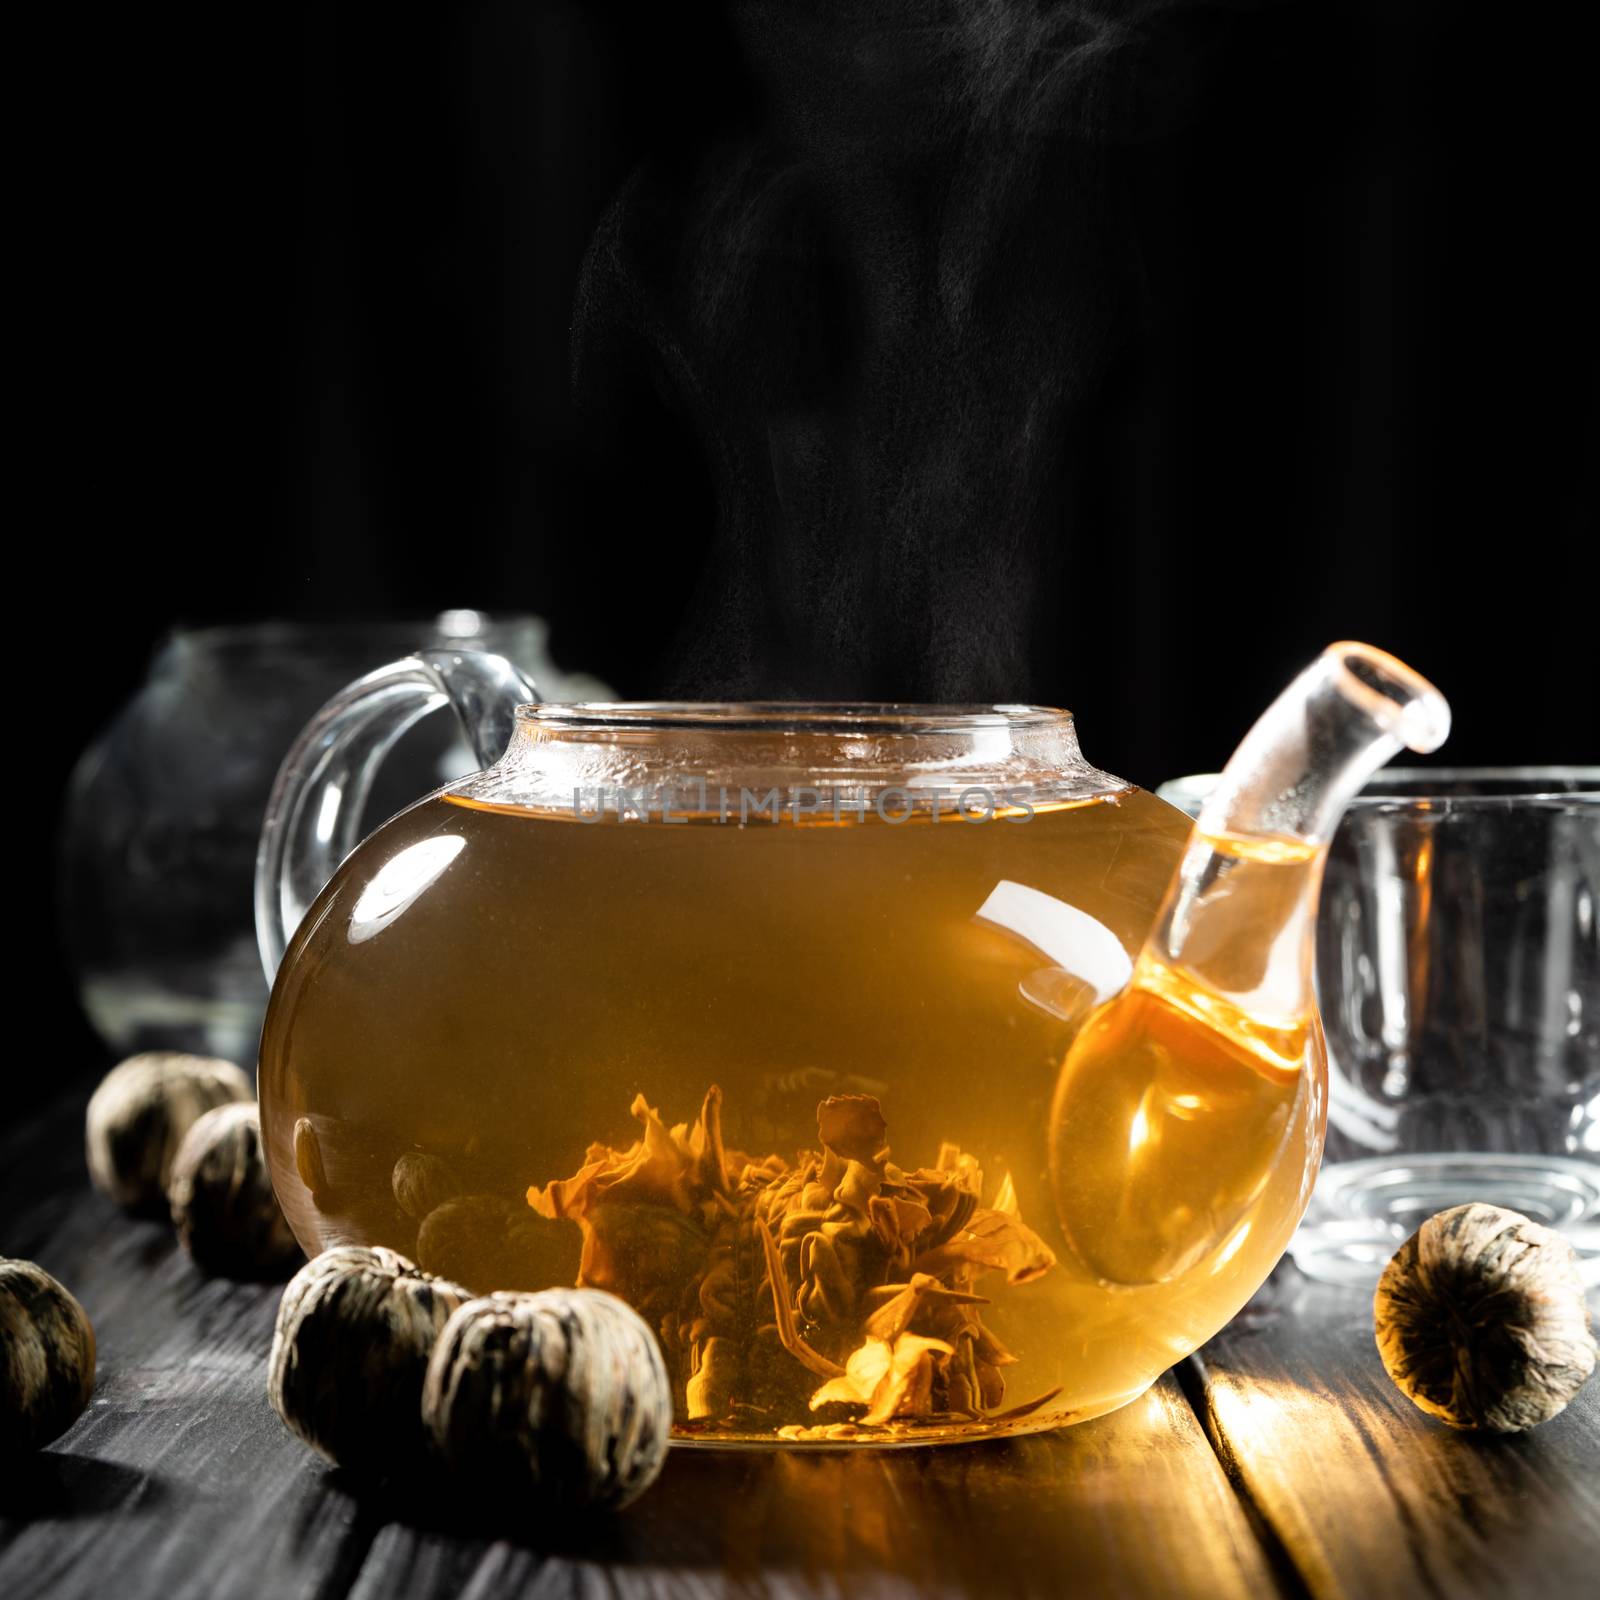 Brewing tea. Glass teapot with hot tea and steam front view dark background